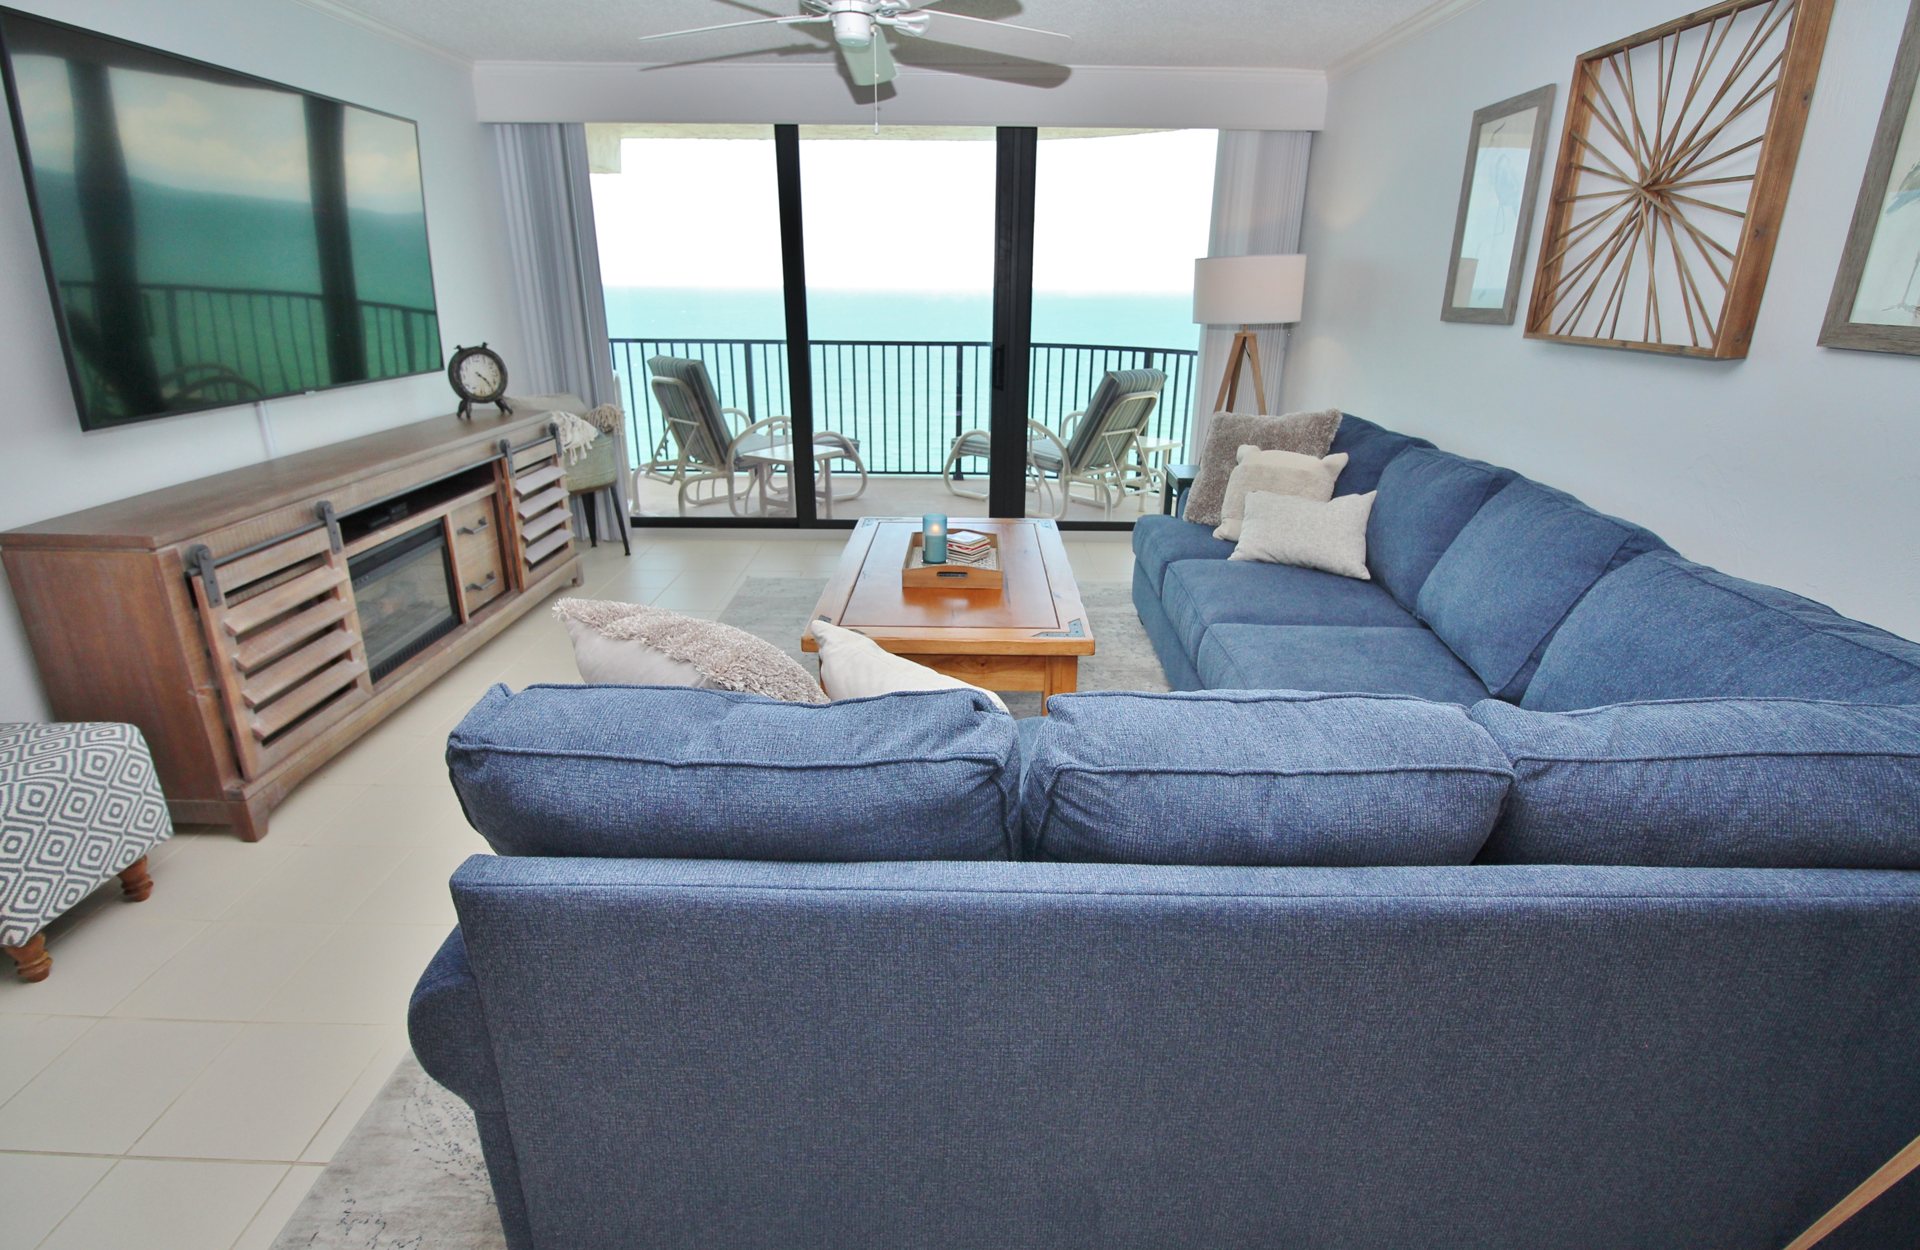 Living Room with a Big Comfy Couch and 24/7 Ocean Views